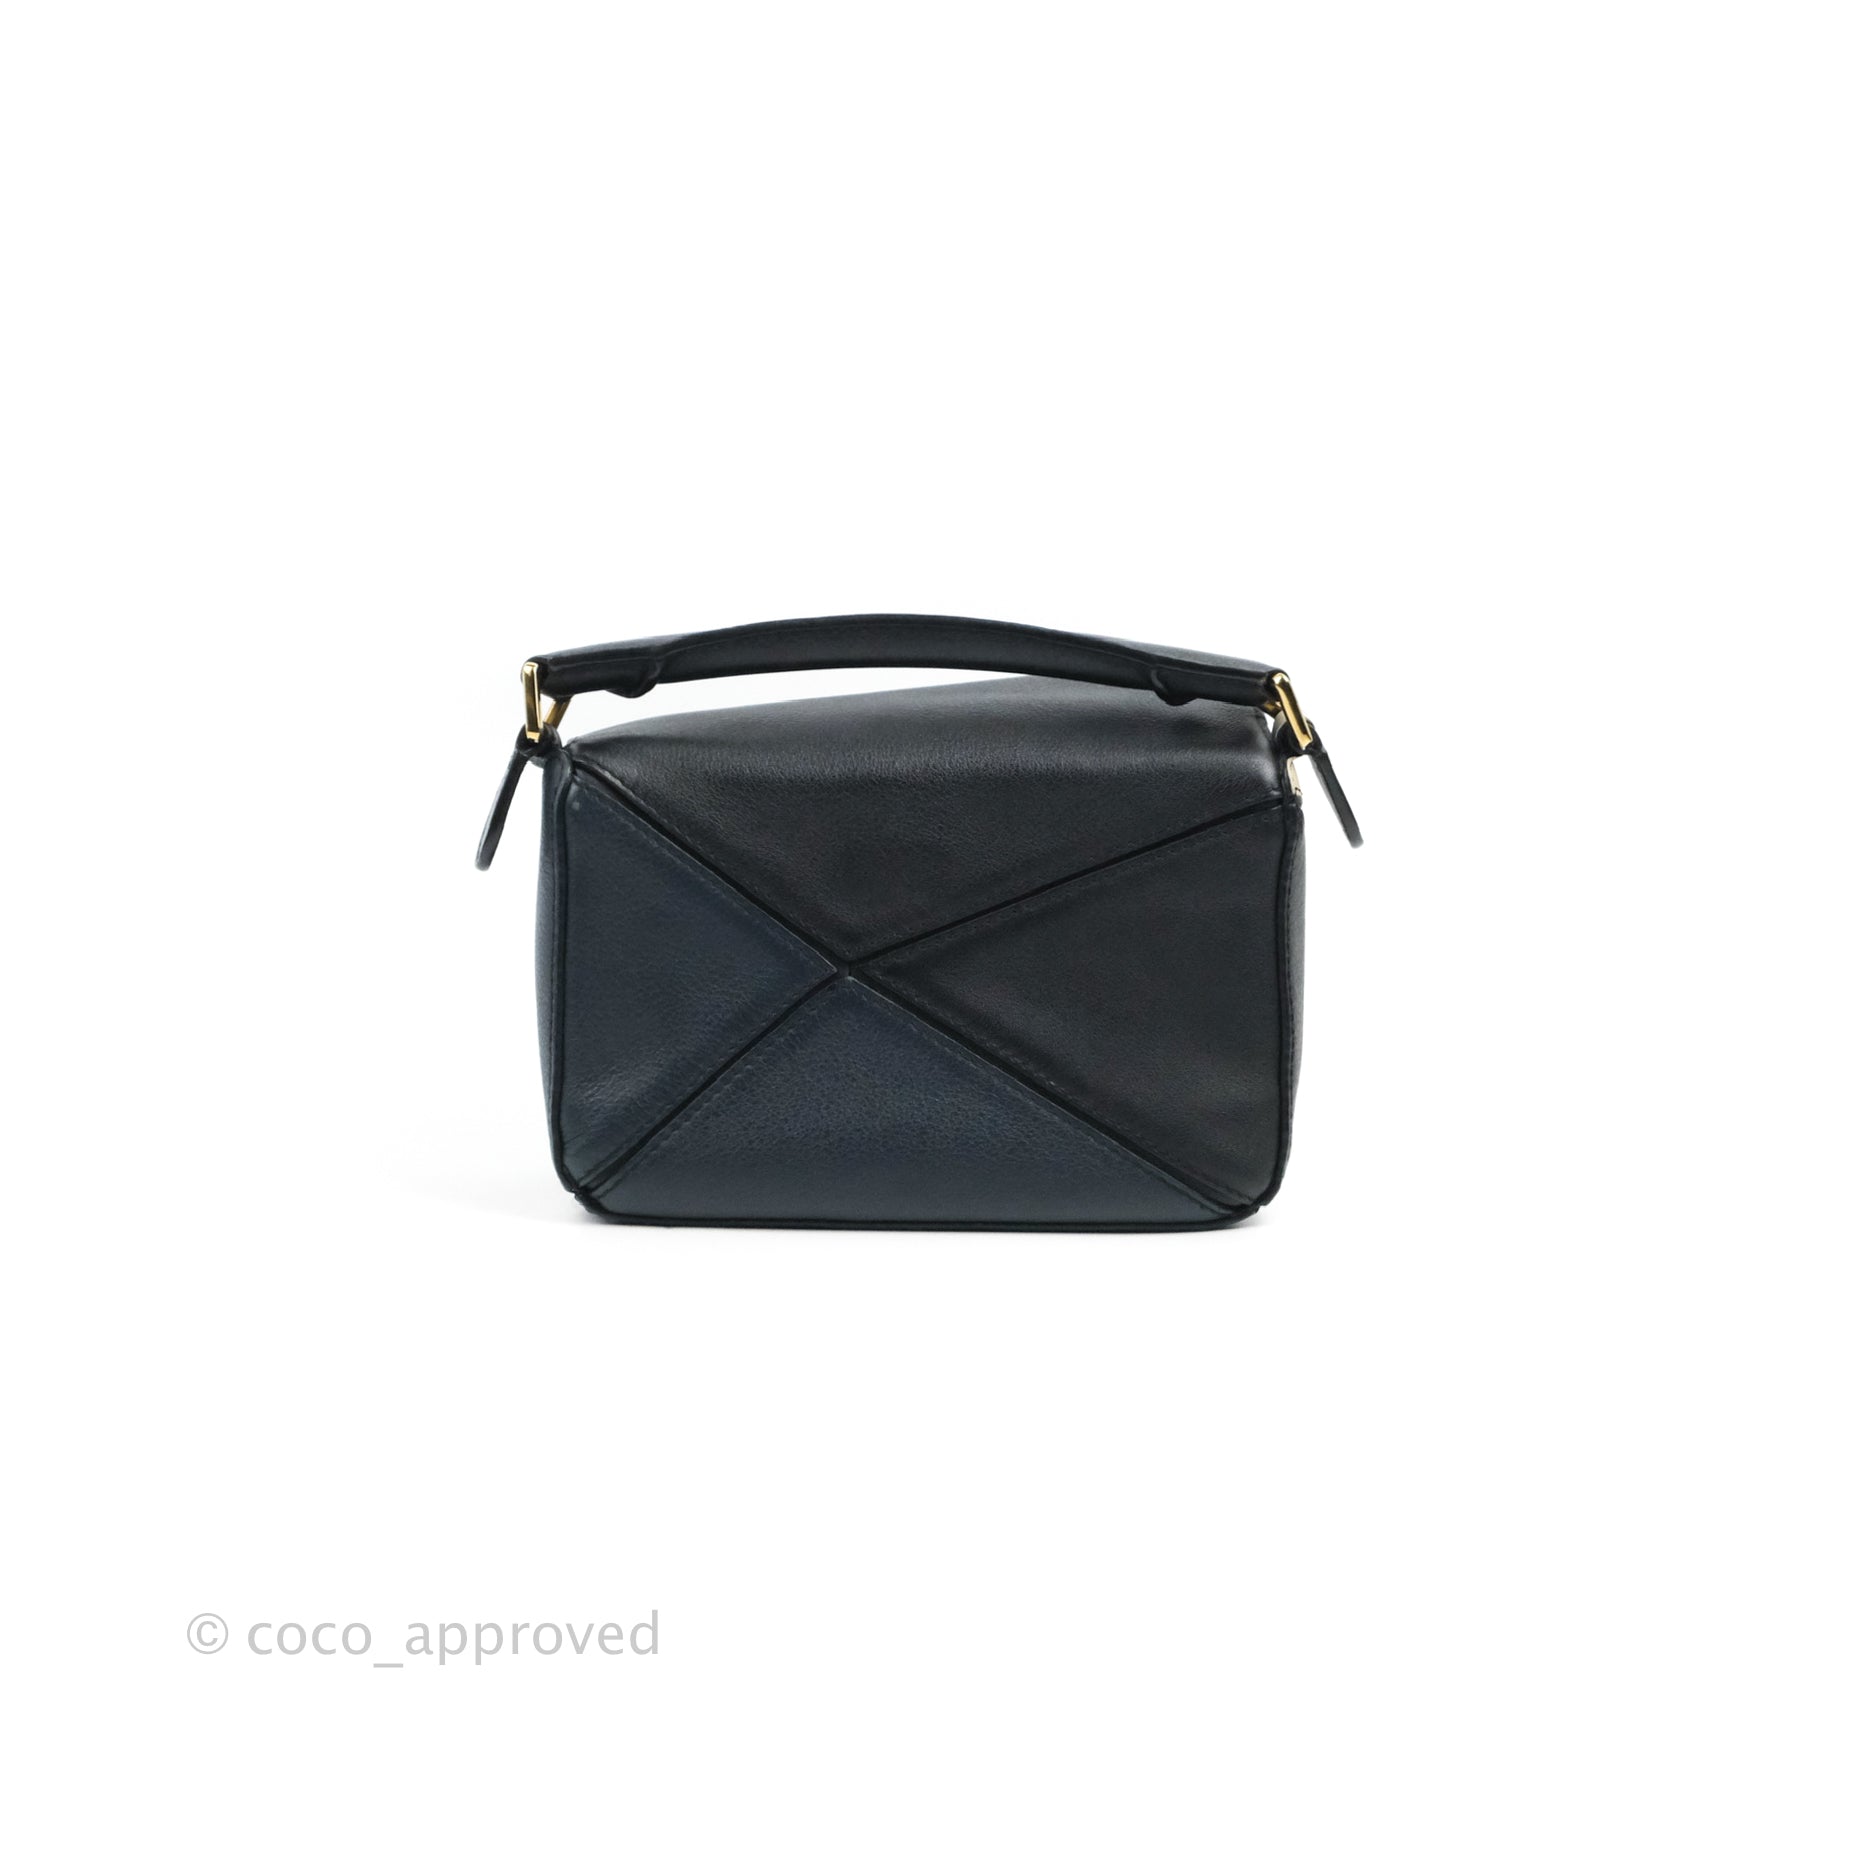 Black Puzzle small grained-leather cross-body bag, LOEWE